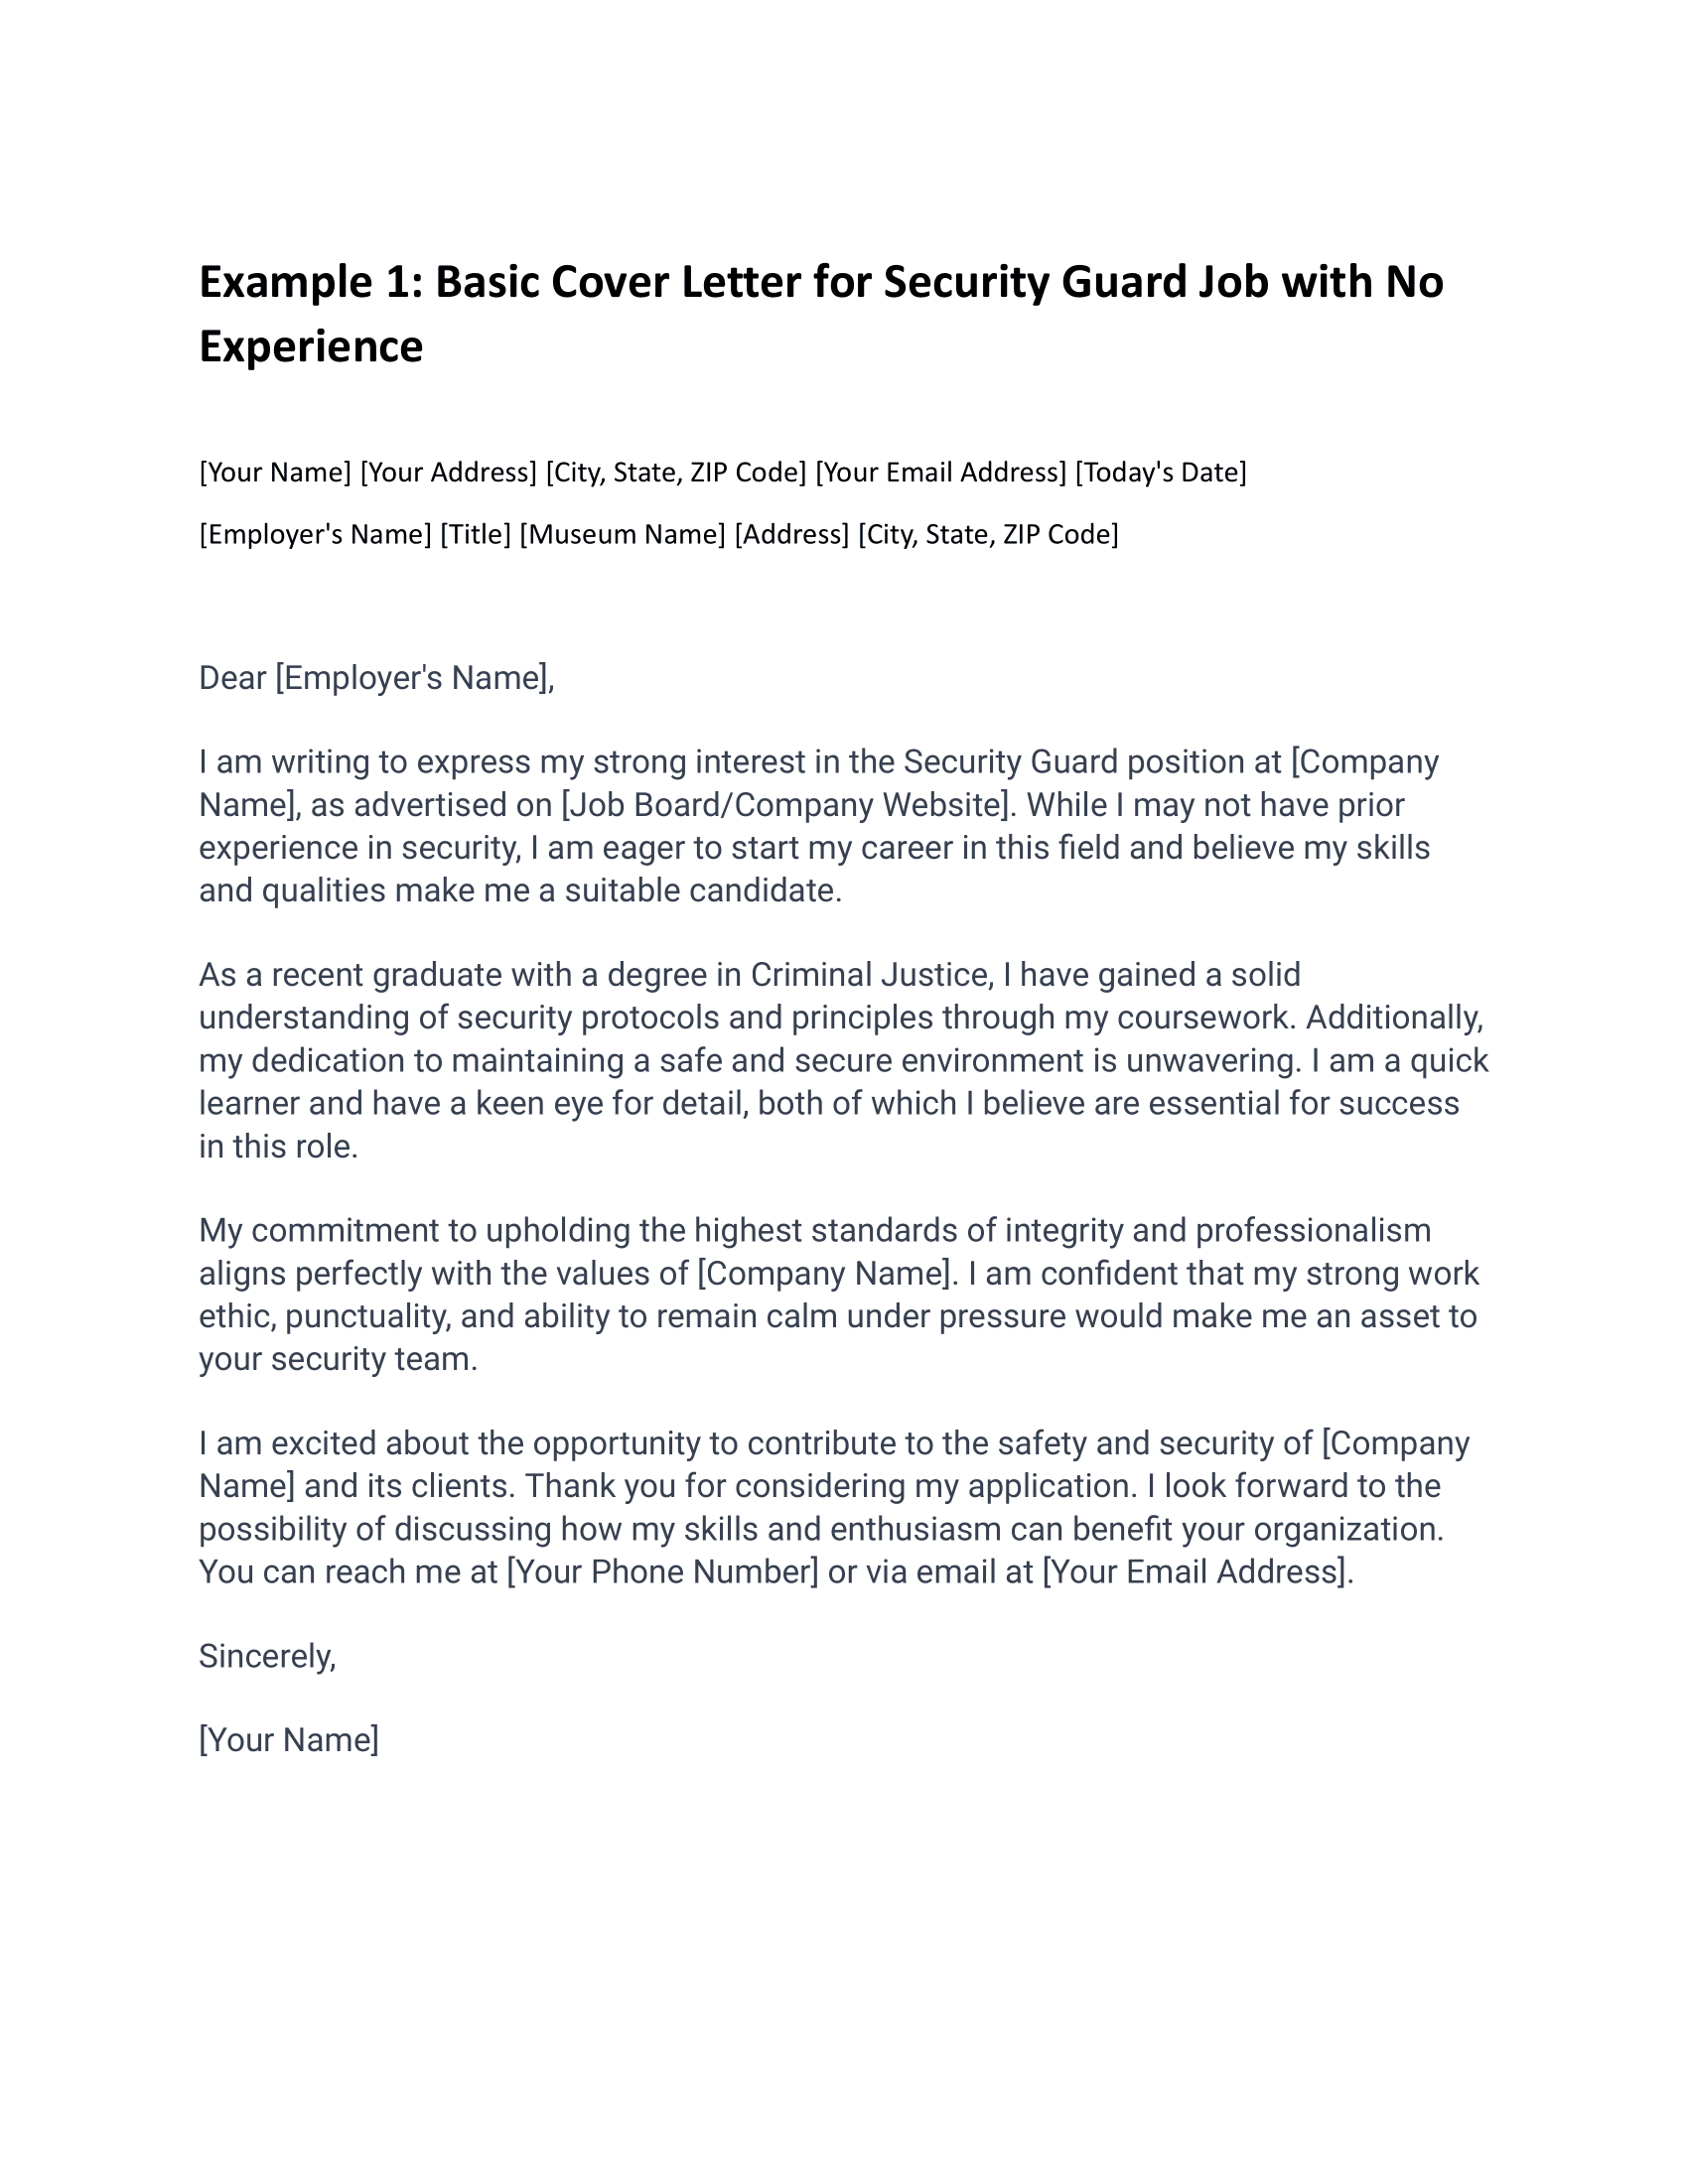 Basic Cover Letter for Security Guard Job with No Experience